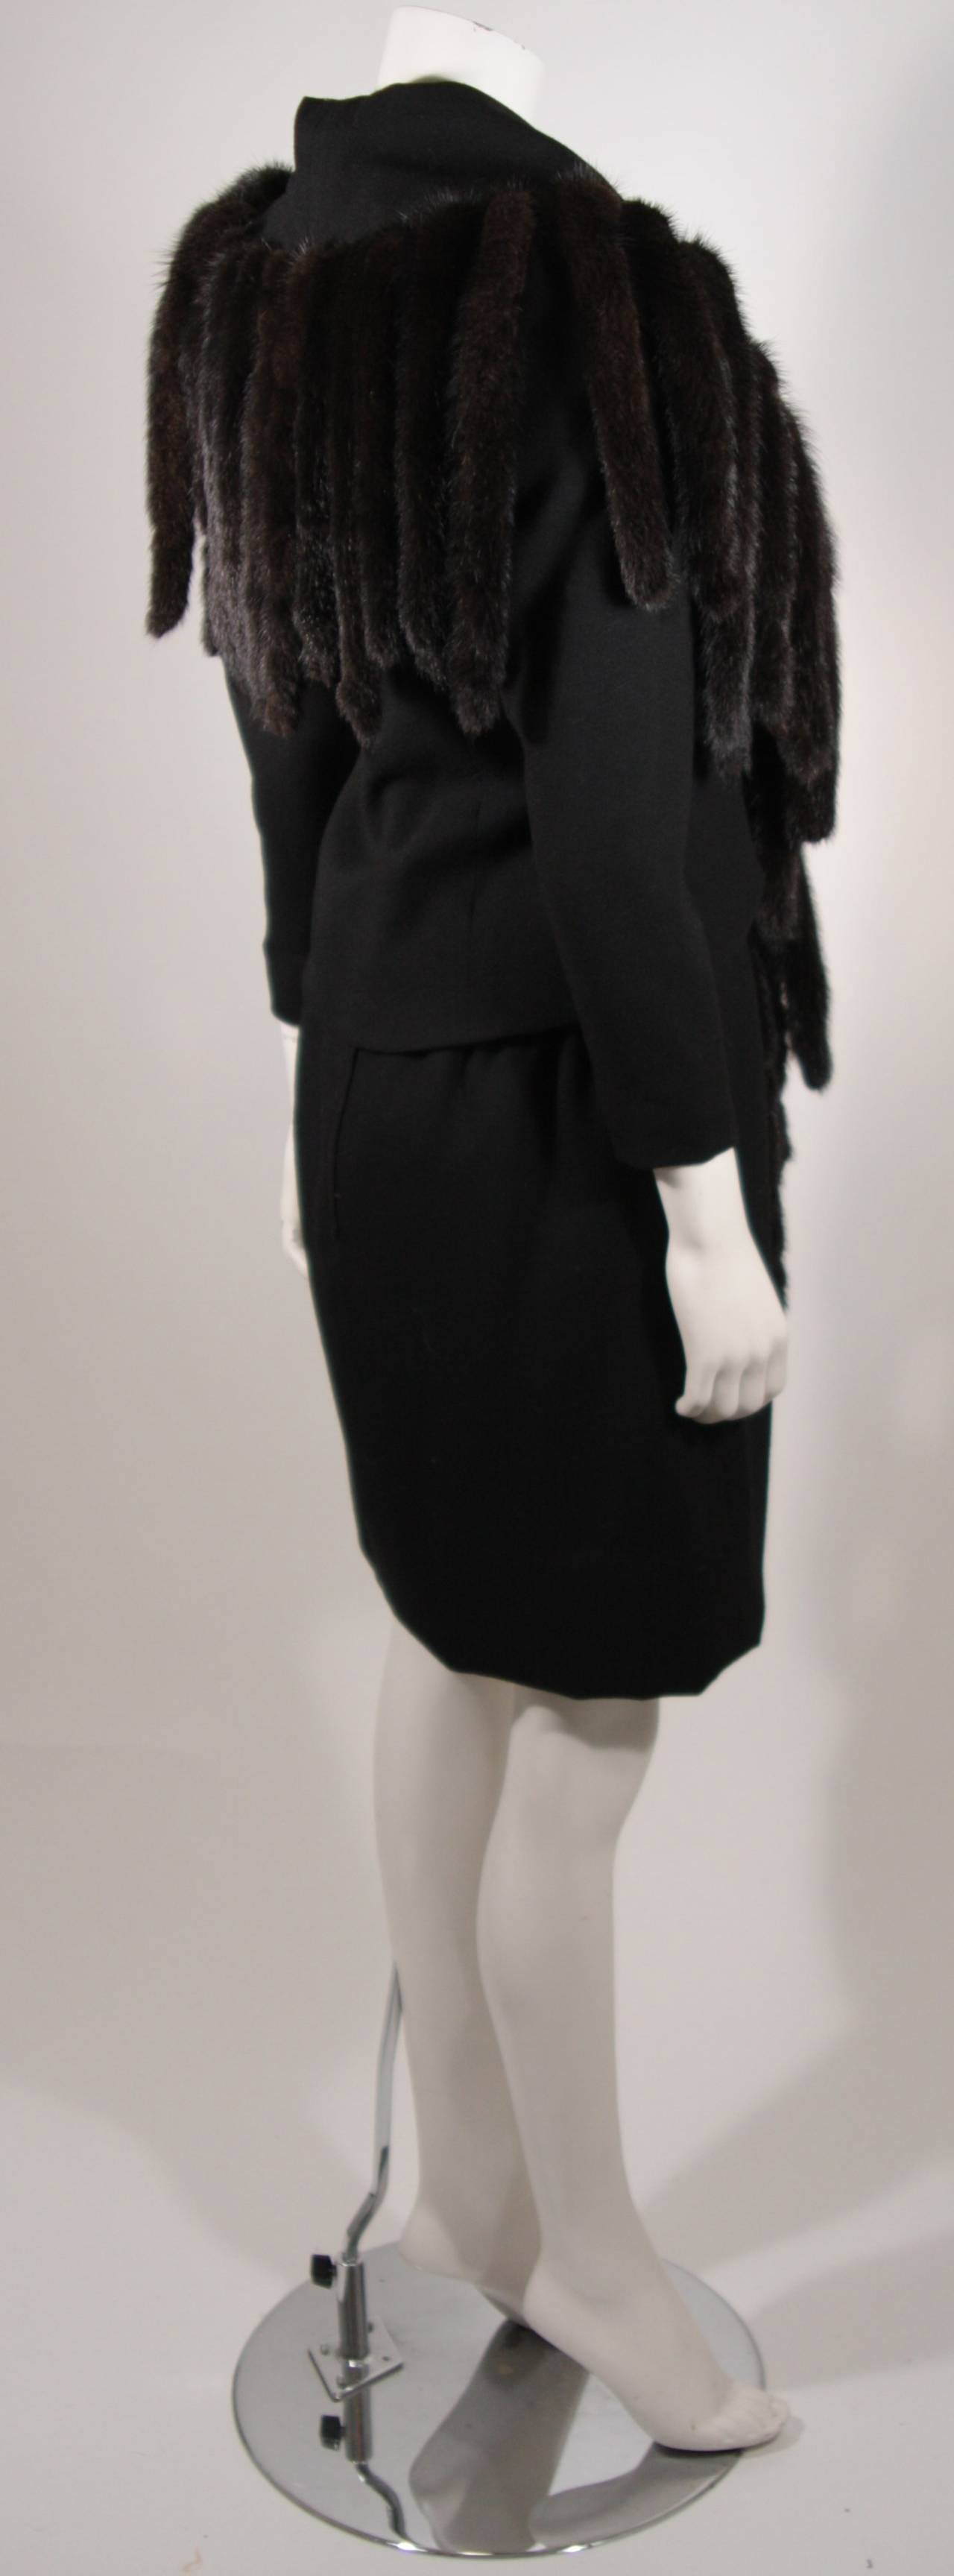 Travilla Black Wool Dress Ensemble with Mink Tail Fringed Coat Size 6-8 For Sale 2